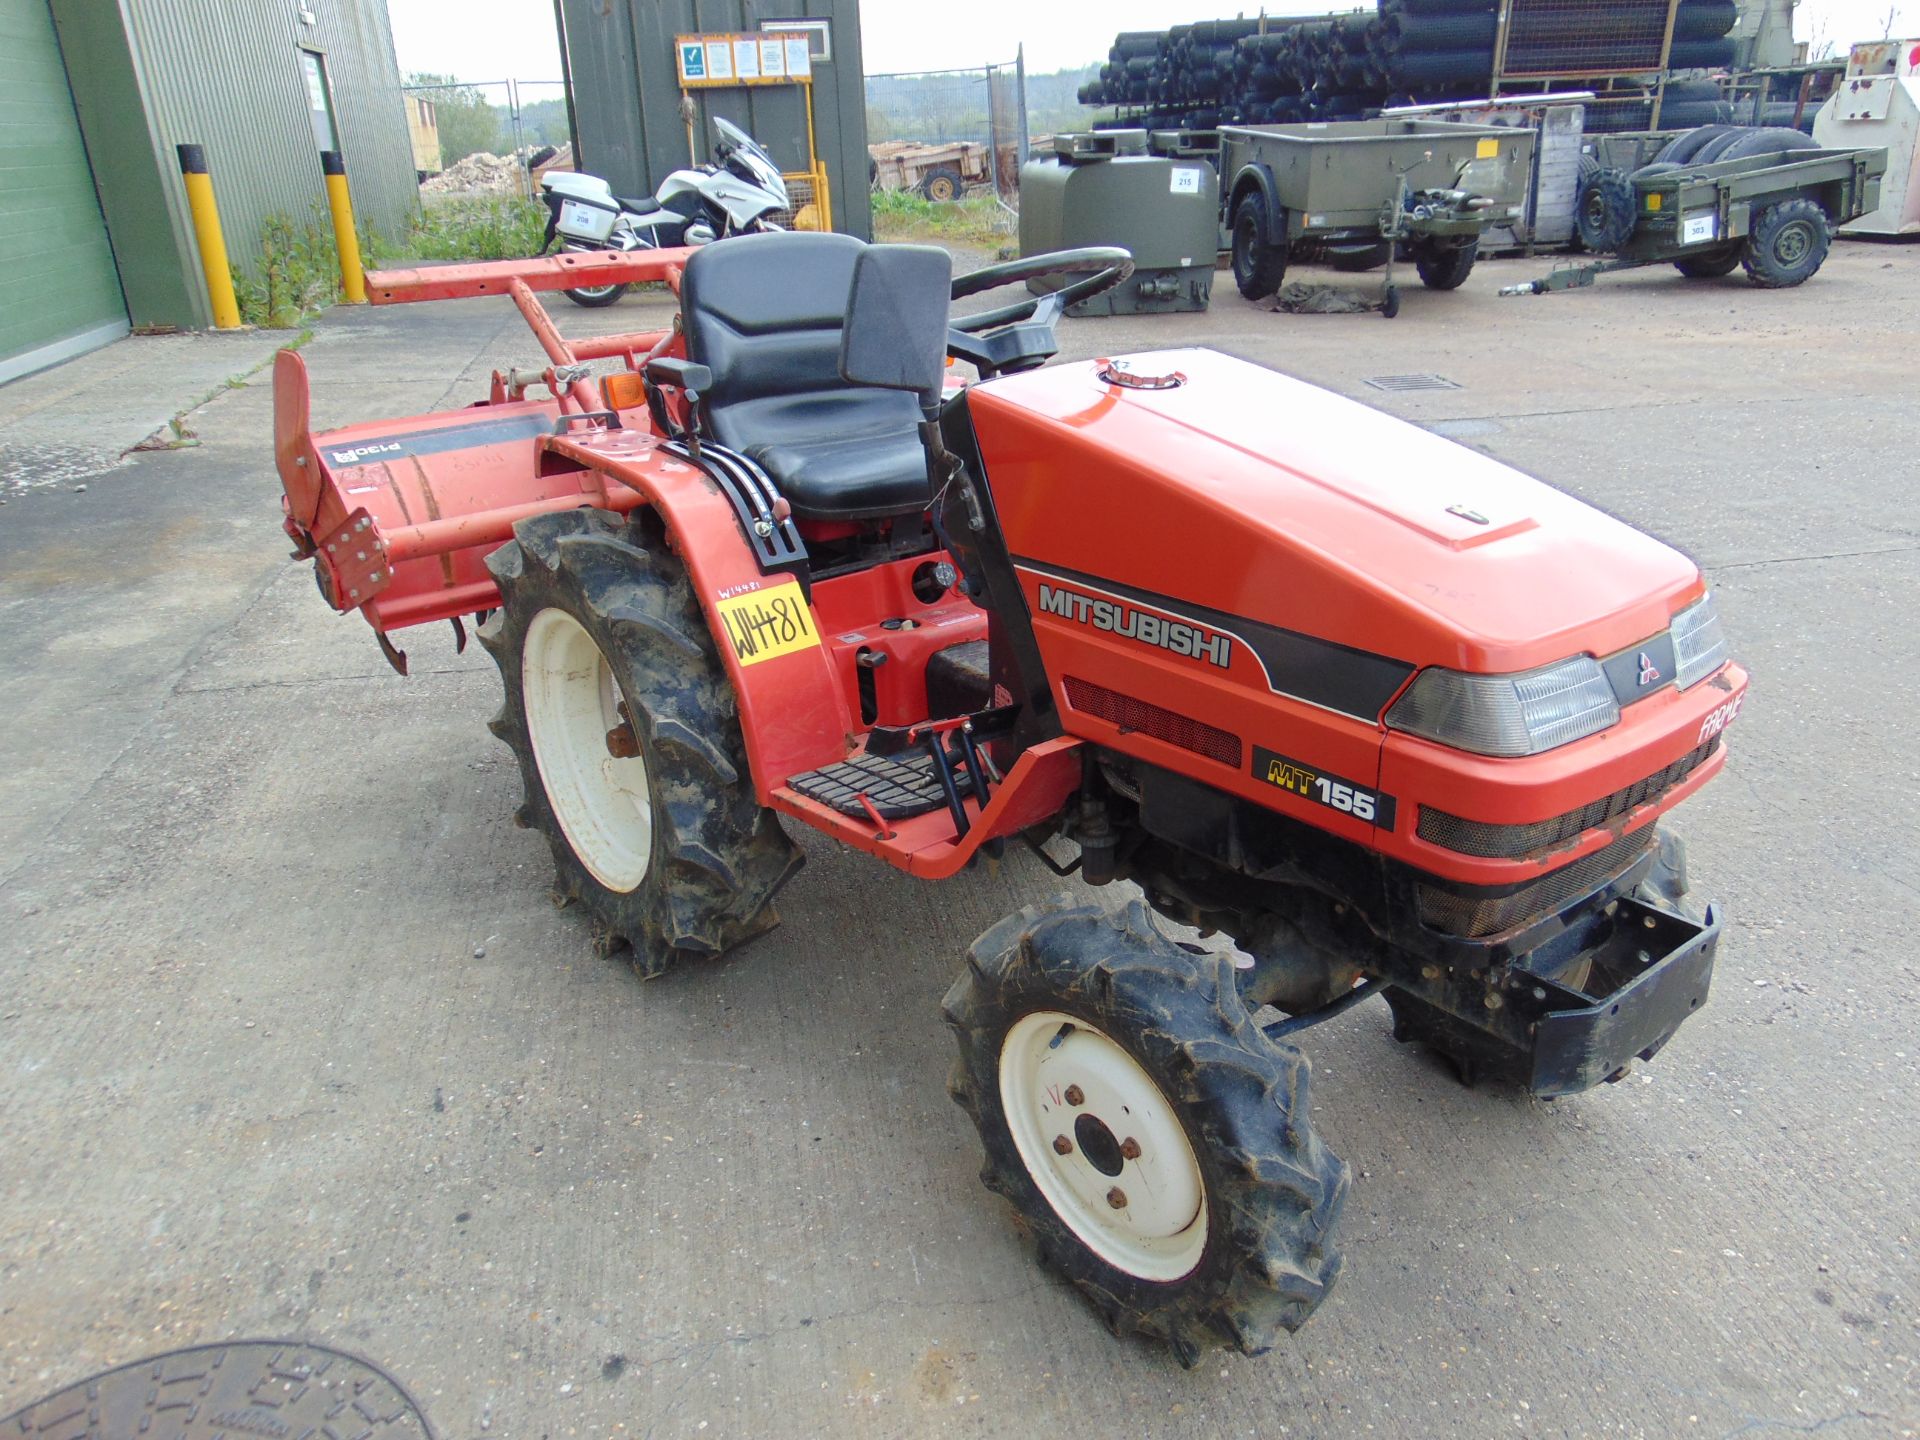 Mitsubishi MT155 Compact Tractor w/ Rotary Tiller - Image 9 of 34